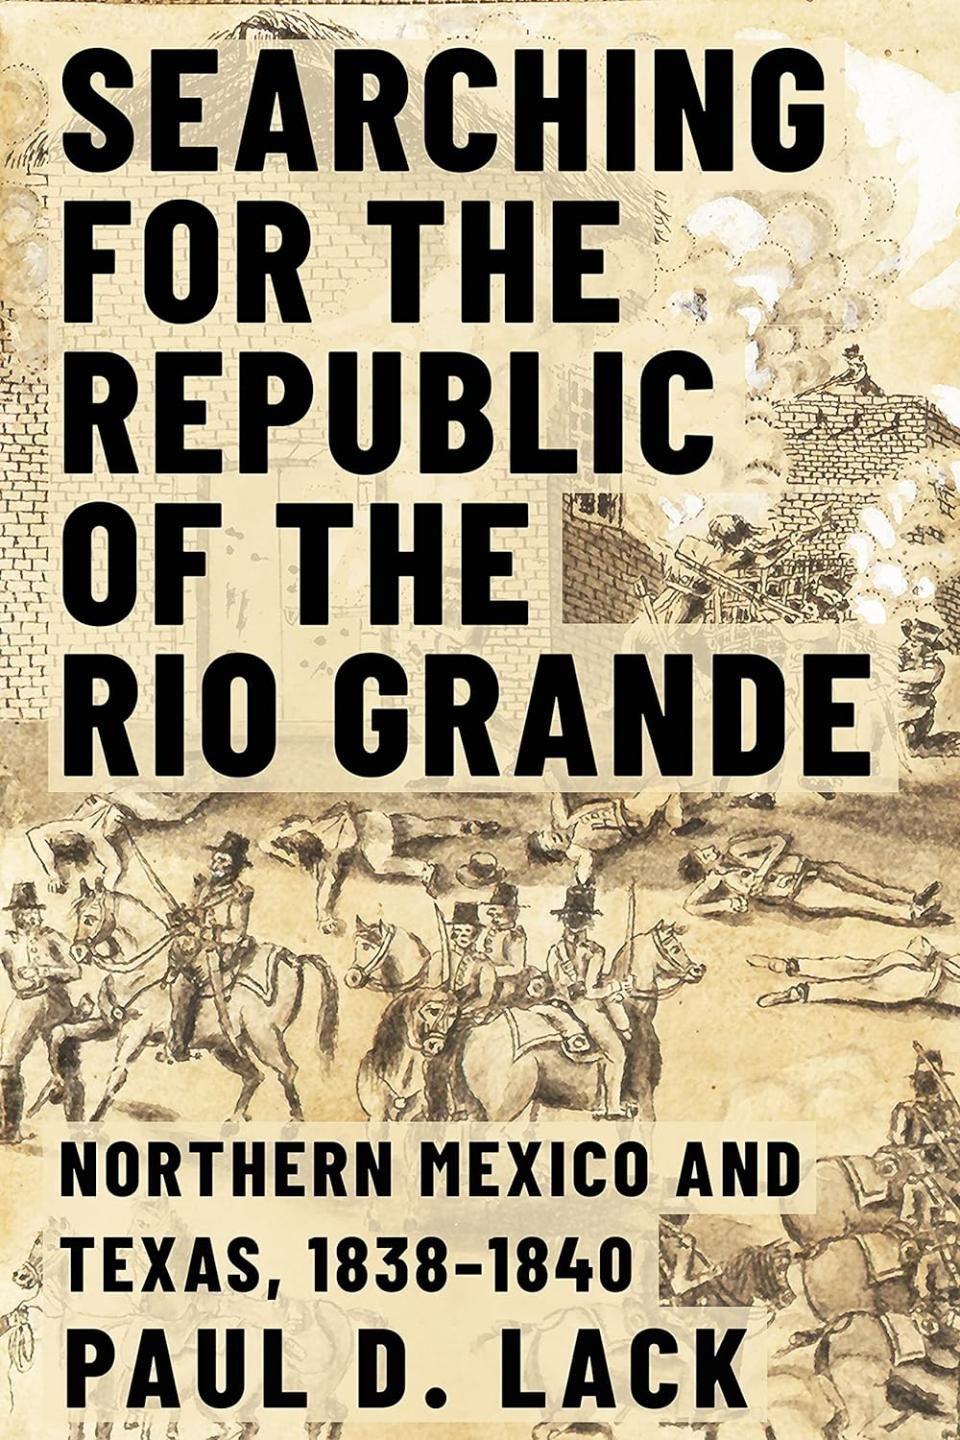 Here's a part of Texas and Mexican history you might have missed in "Searching for the Republic of the Rio Grande" by Paul D. Lack